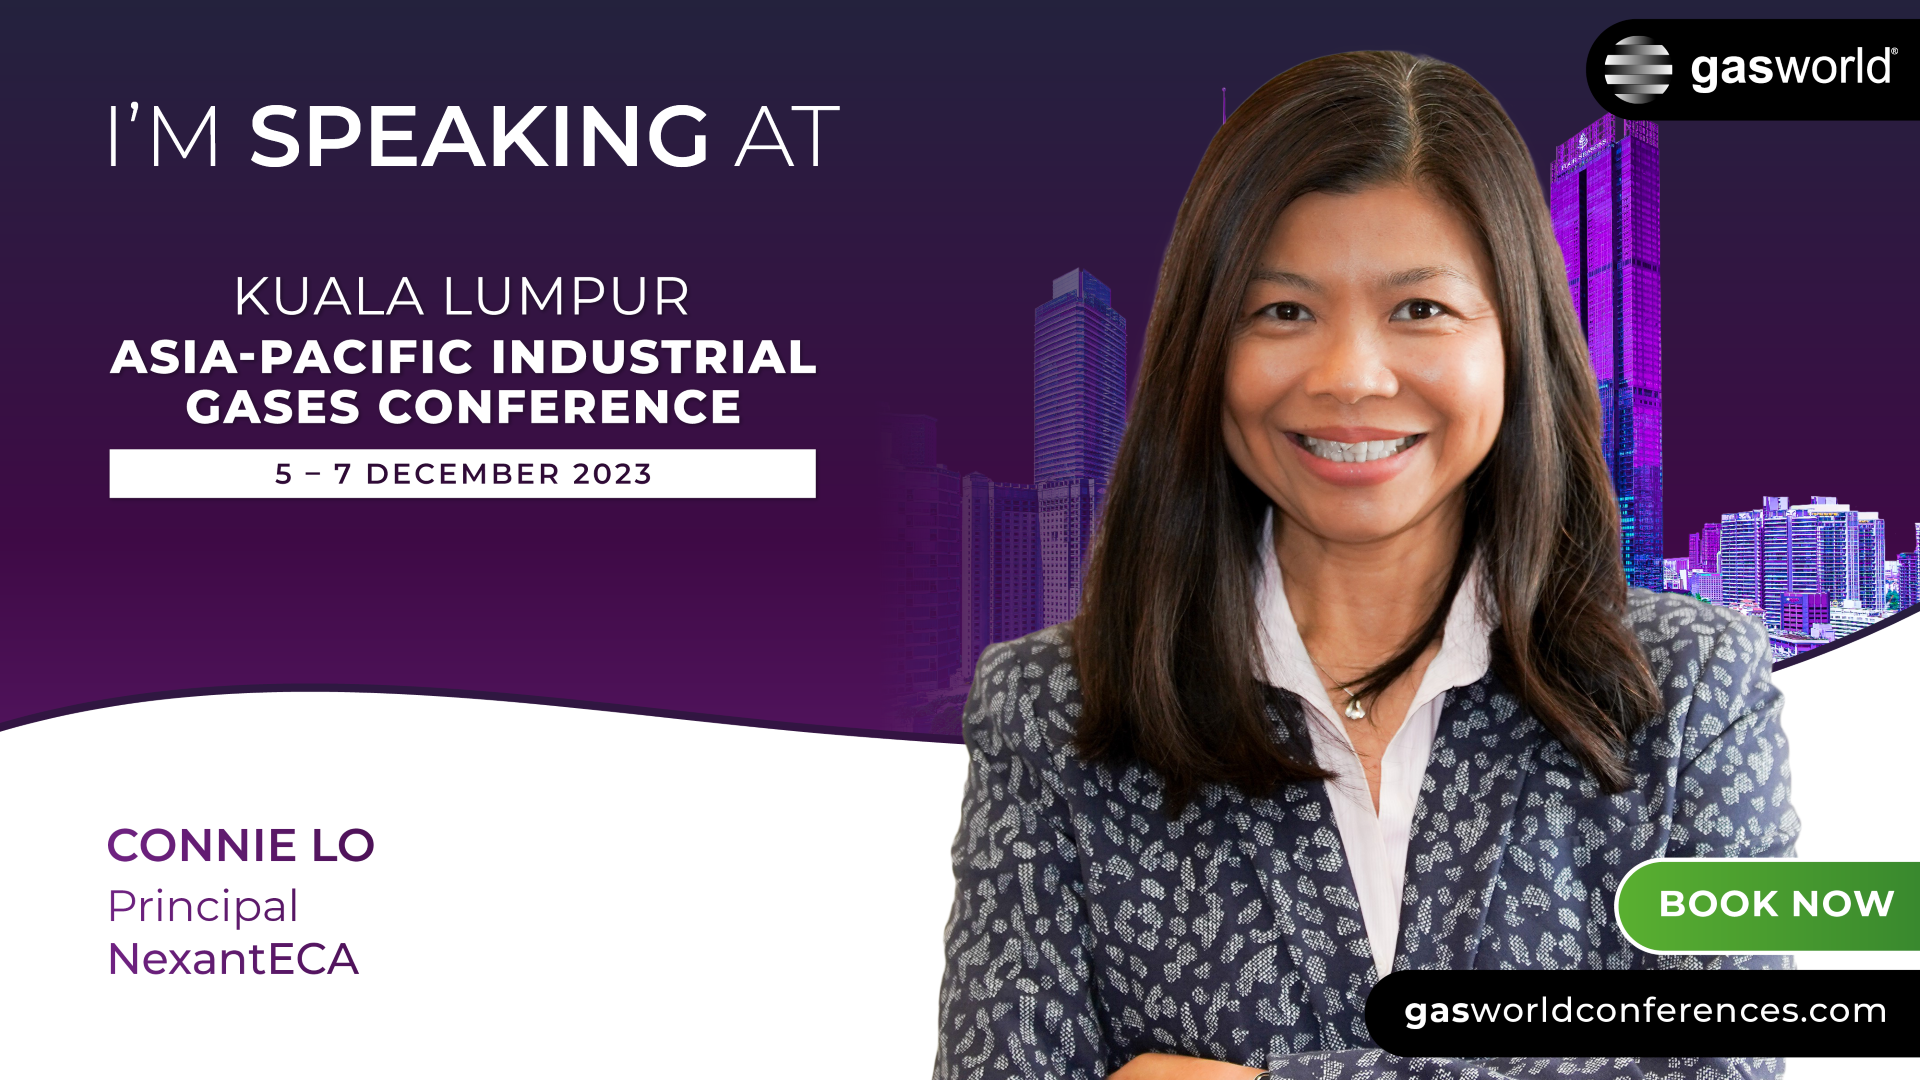 Connie Lo with be taking part in panel discussions at next weeks Asia-Pacific Industrial Gases Conference 2023